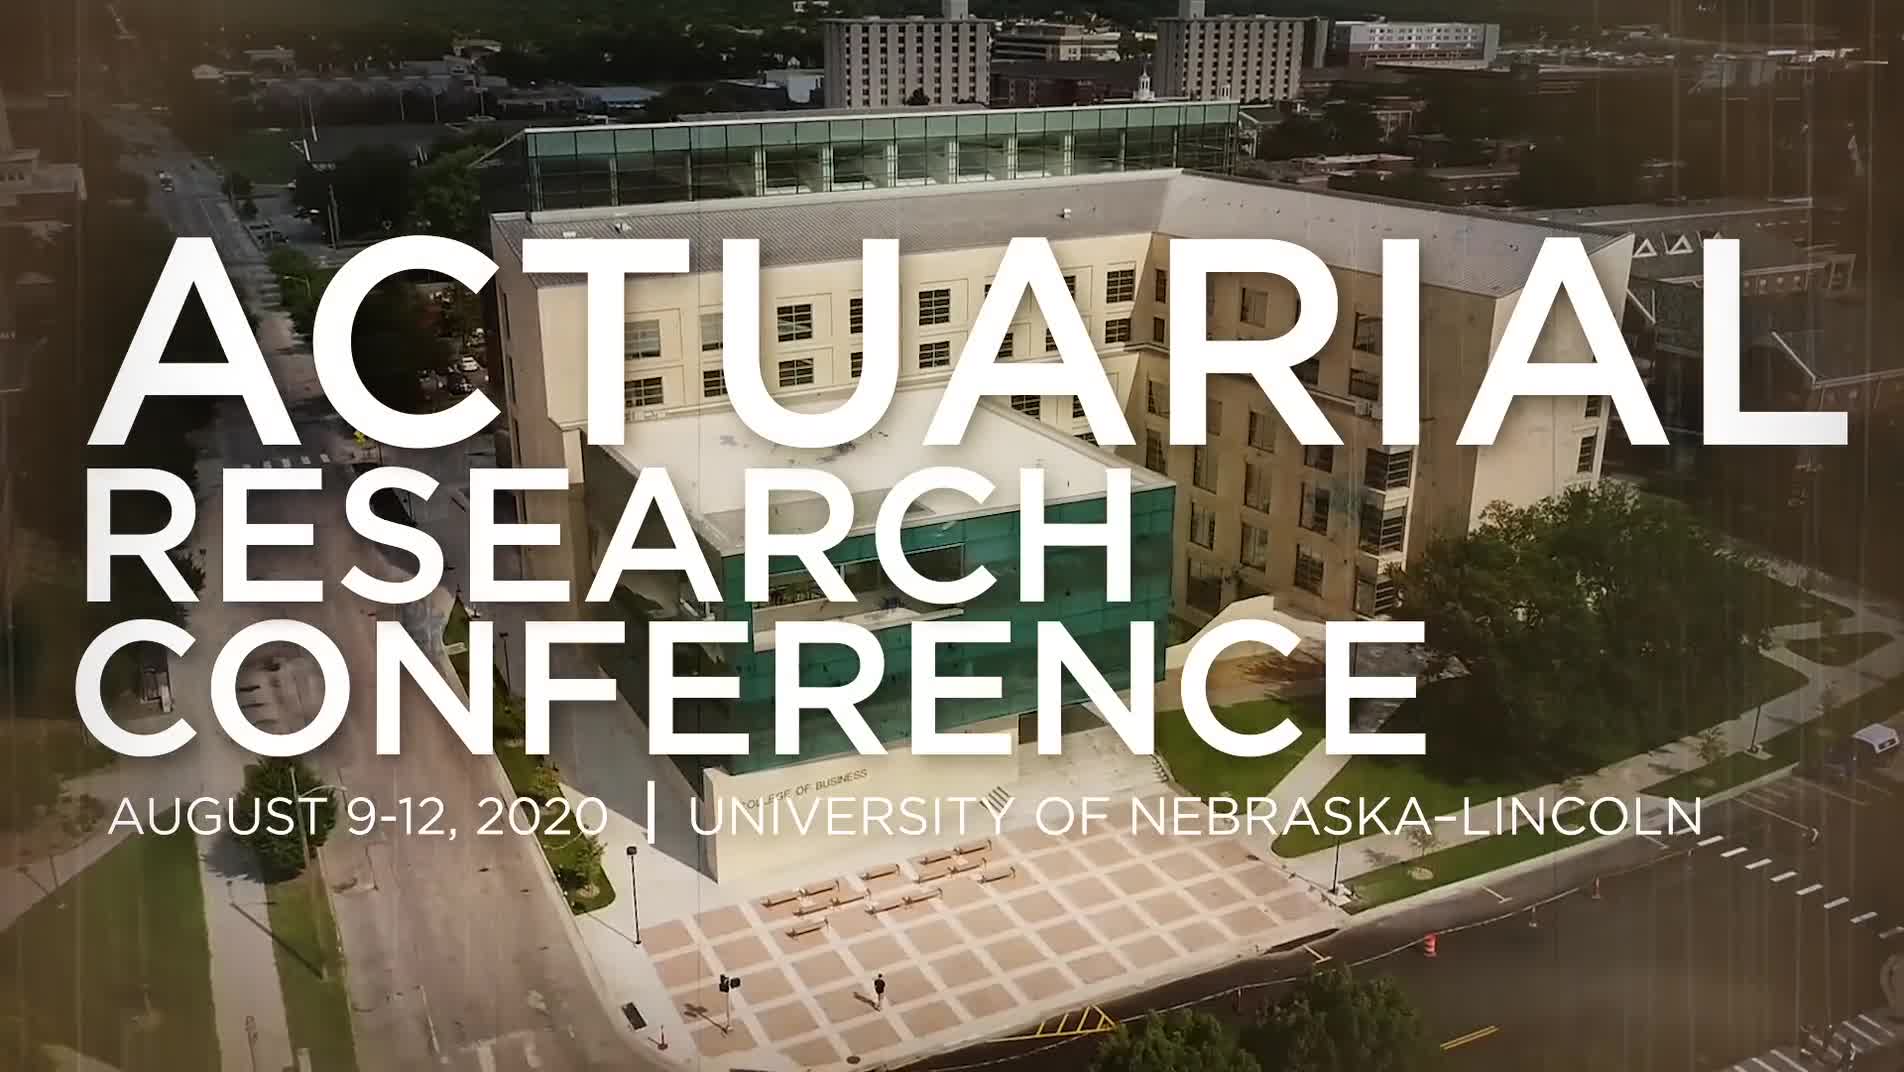 Actuarial Research Conference 2020 Hosted by University of Nebraska-Lincoln